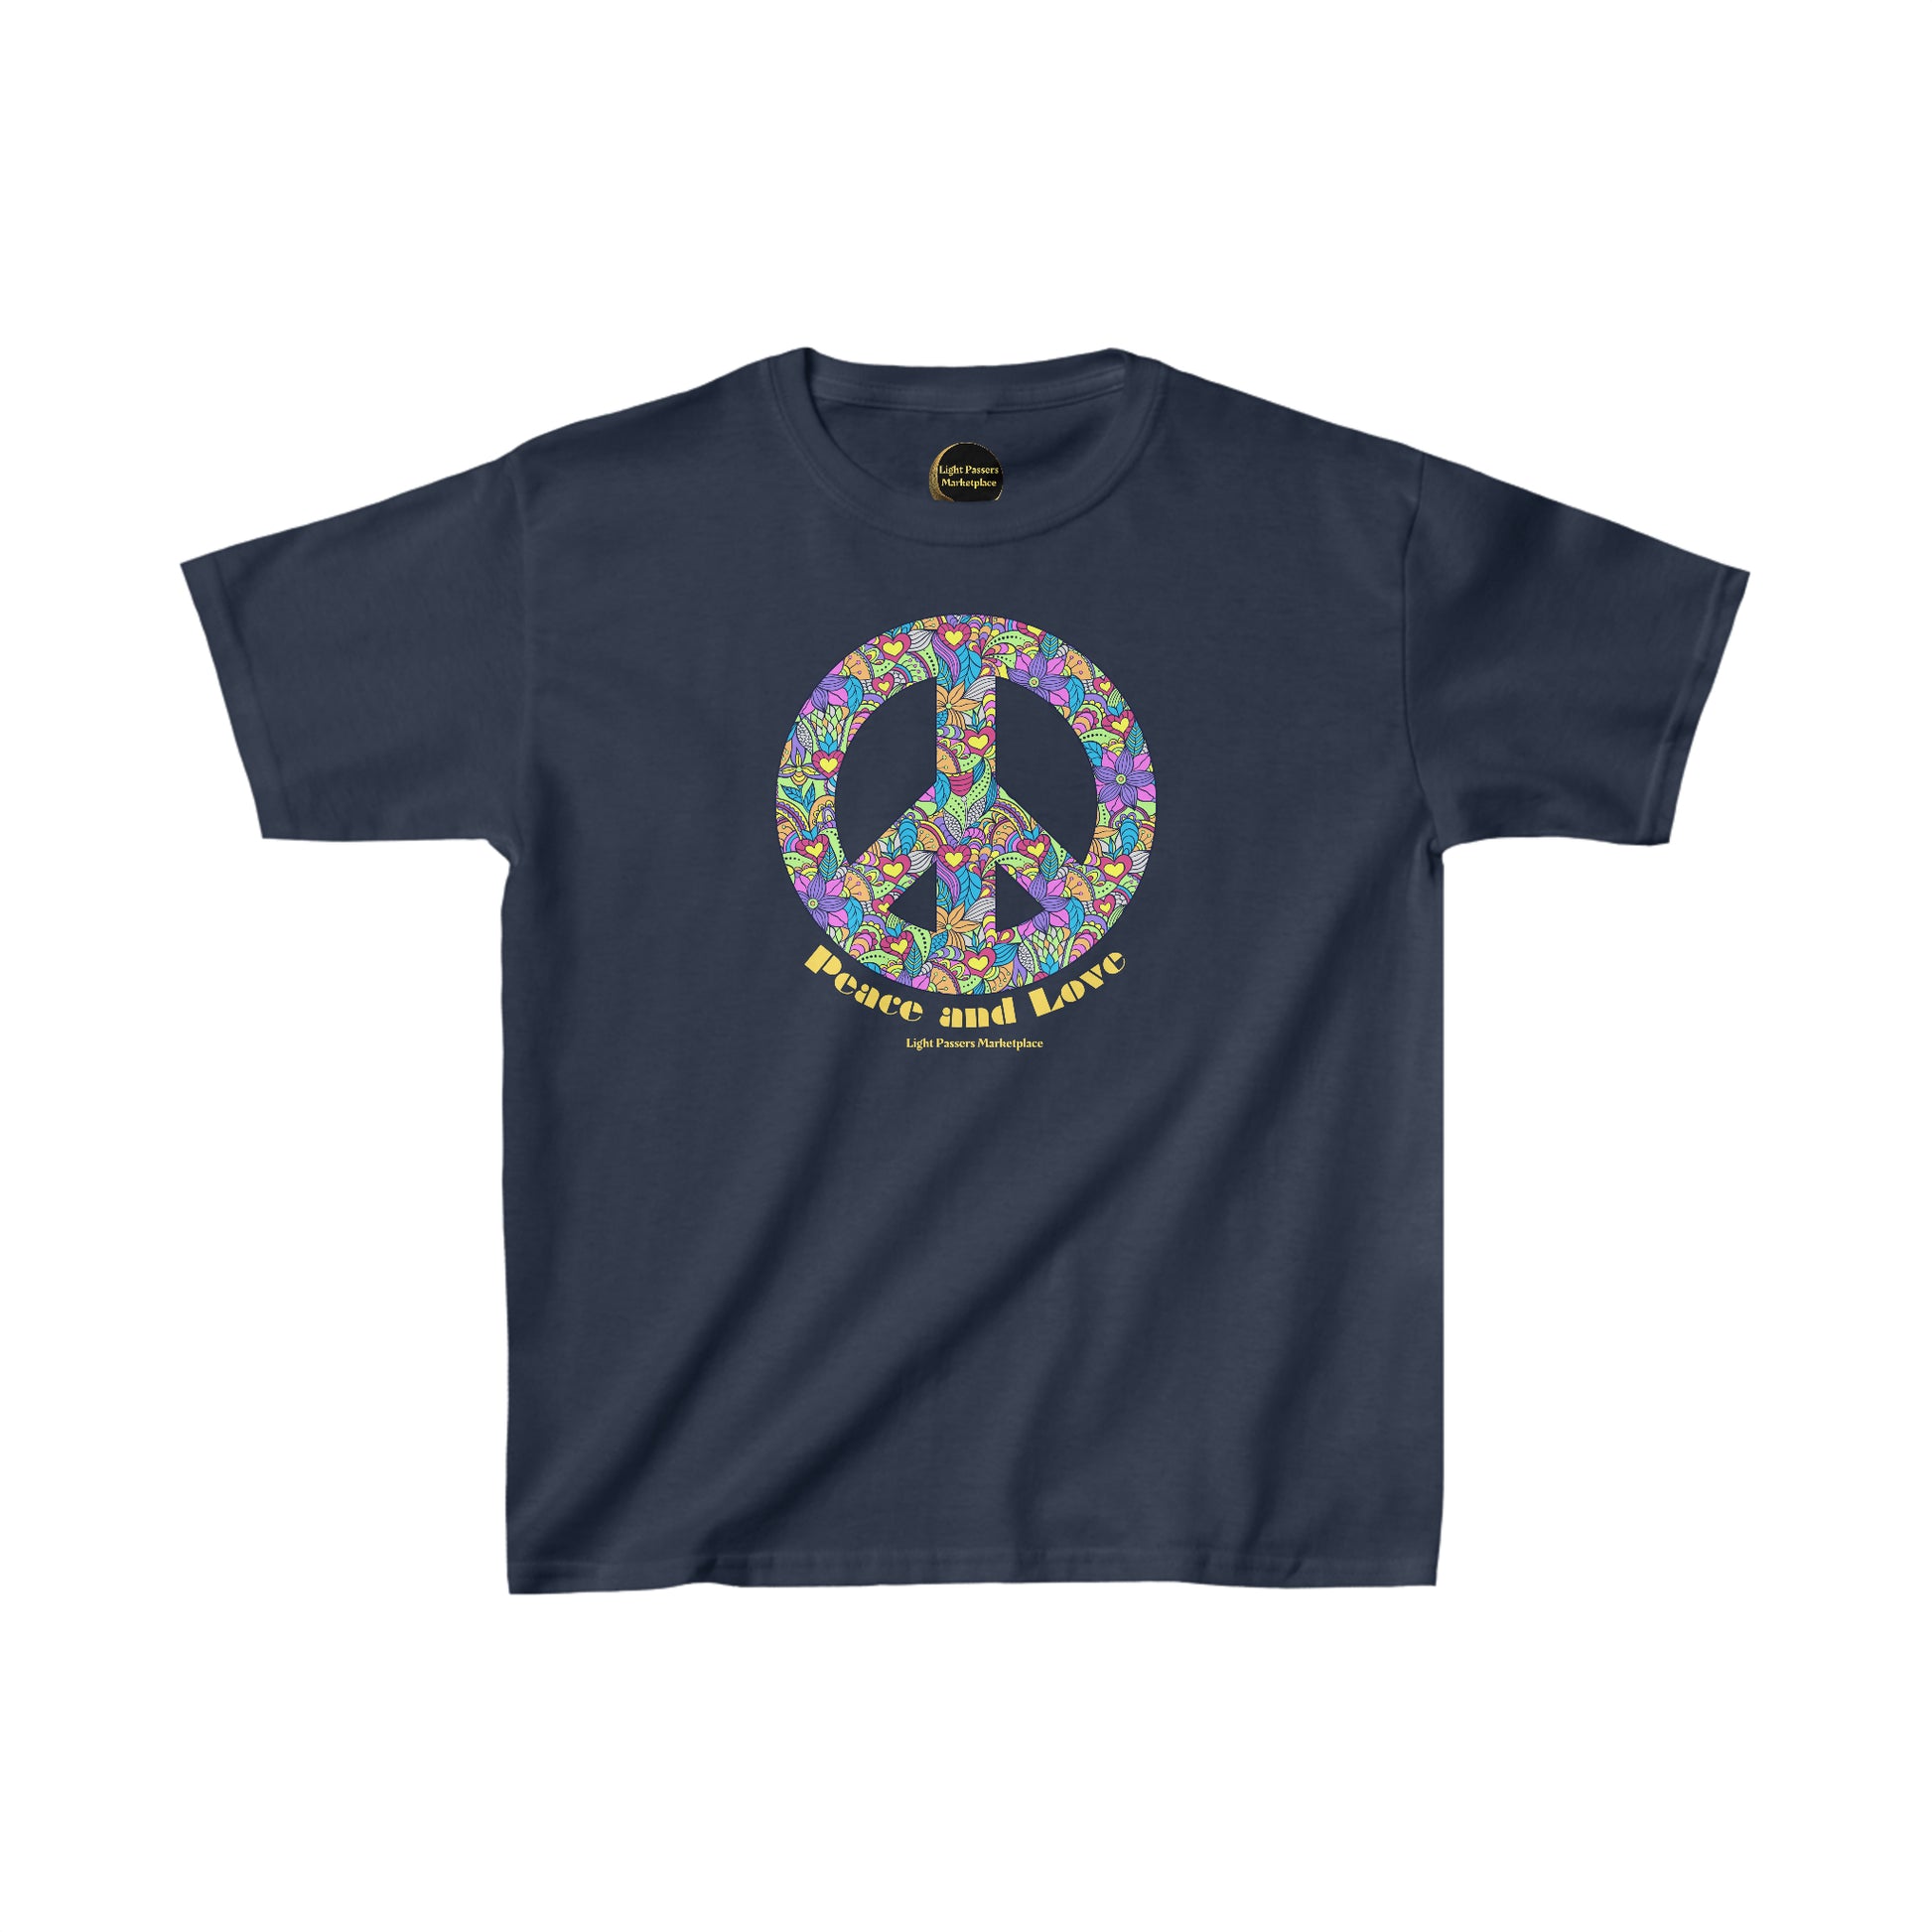 Youth cotton t-shirt featuring a peace sign with colorful flowers, crown drawing, and close-up details. Made with 100% US cotton, ribbed collar, tear-away labels, and ethical production.